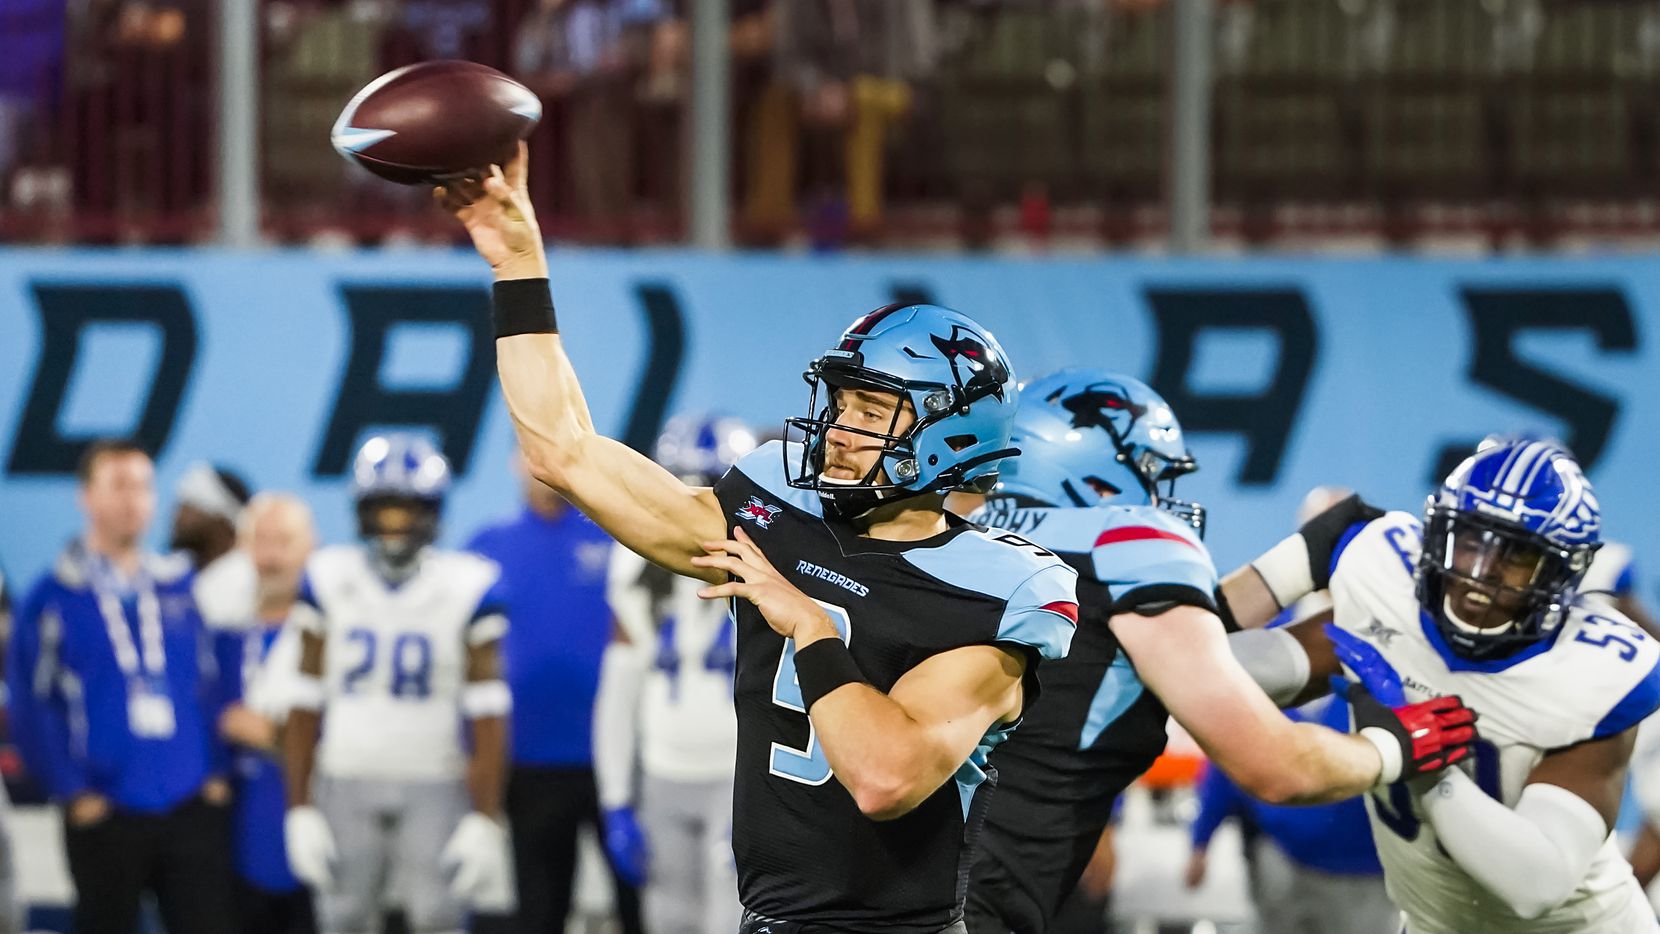 Dallas Renegades quarterback Philip Nelson (9) throws a pass during the second half of an XFL football game against the St. Louis Battlehawks at Globe Life Park on Sunday, Feb. 9, 2020, in Arlington.